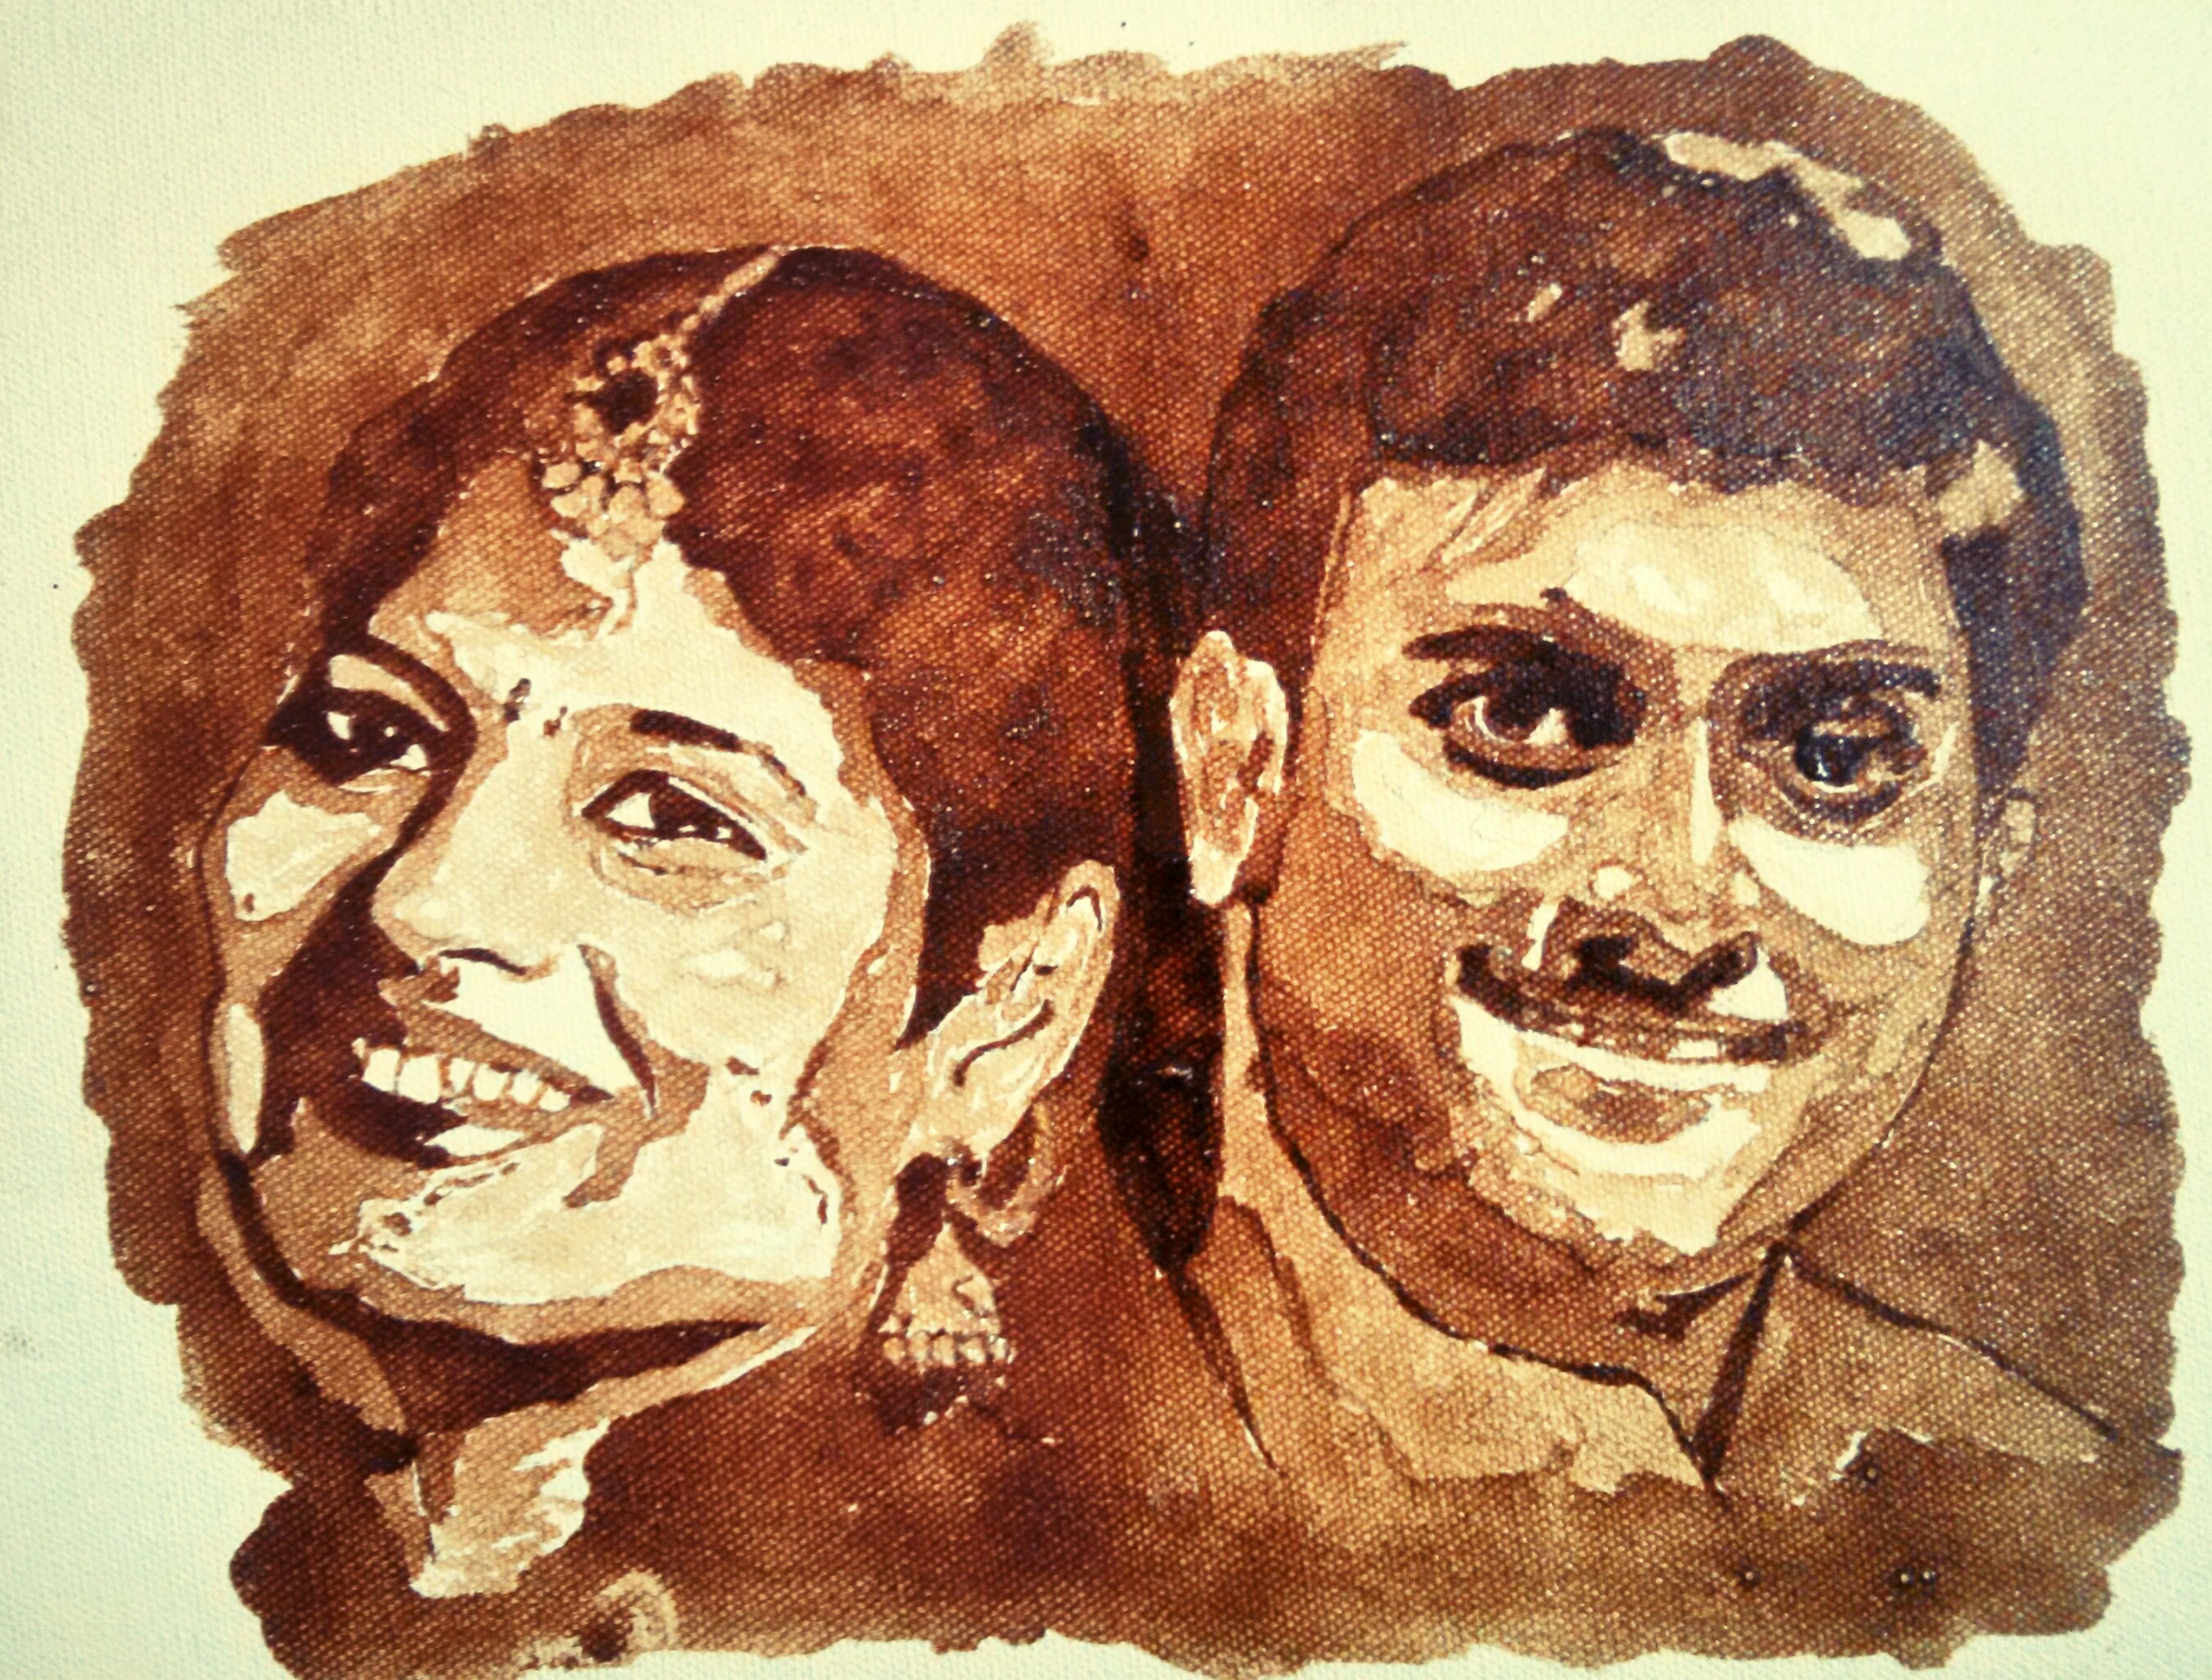 Commissioned portraits made out of coffee